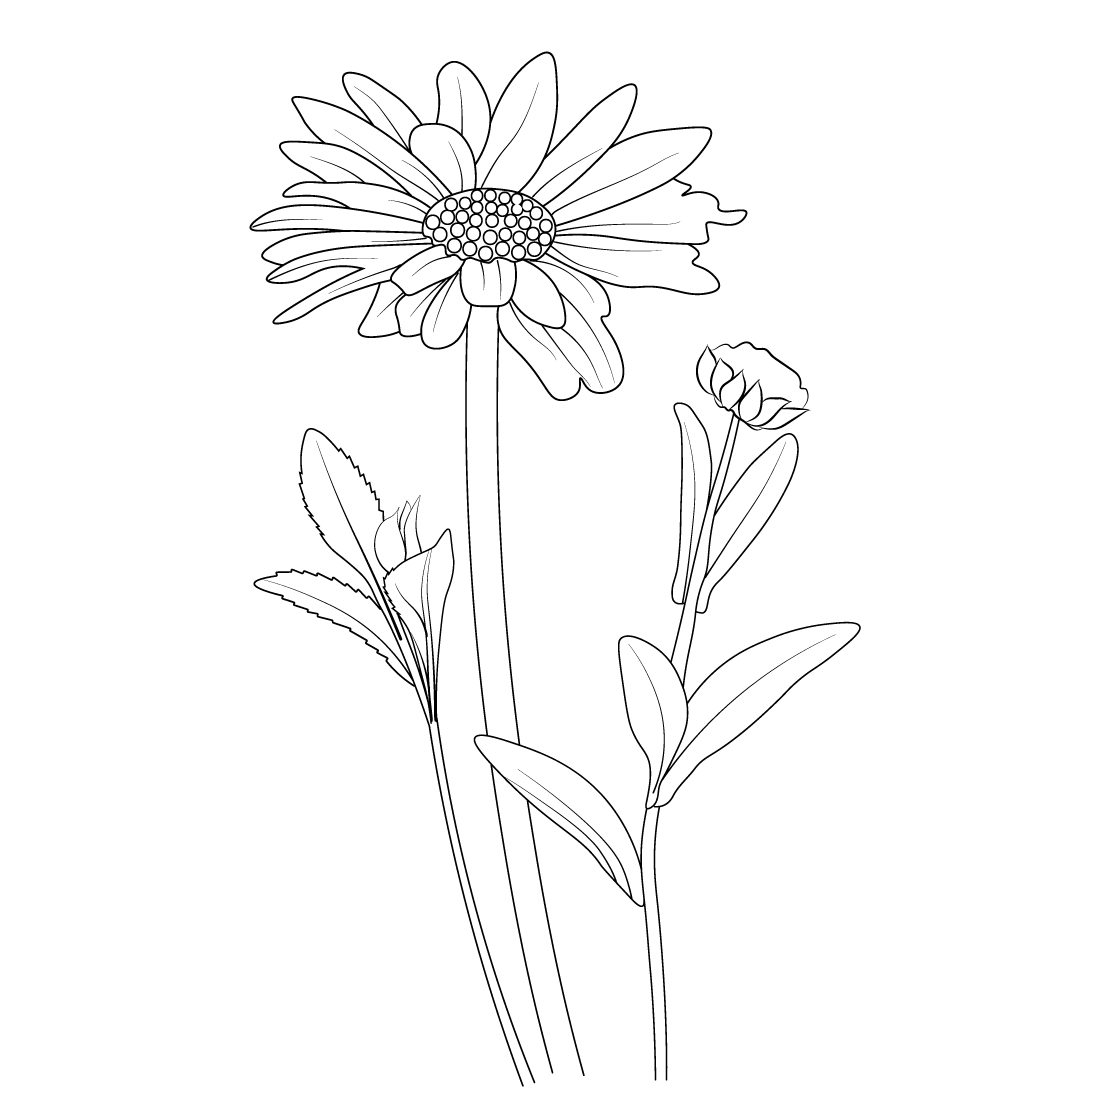 How to draw beautiful flowers? - Step by Step Drawing Guide for Kids-saigonsouth.com.vn